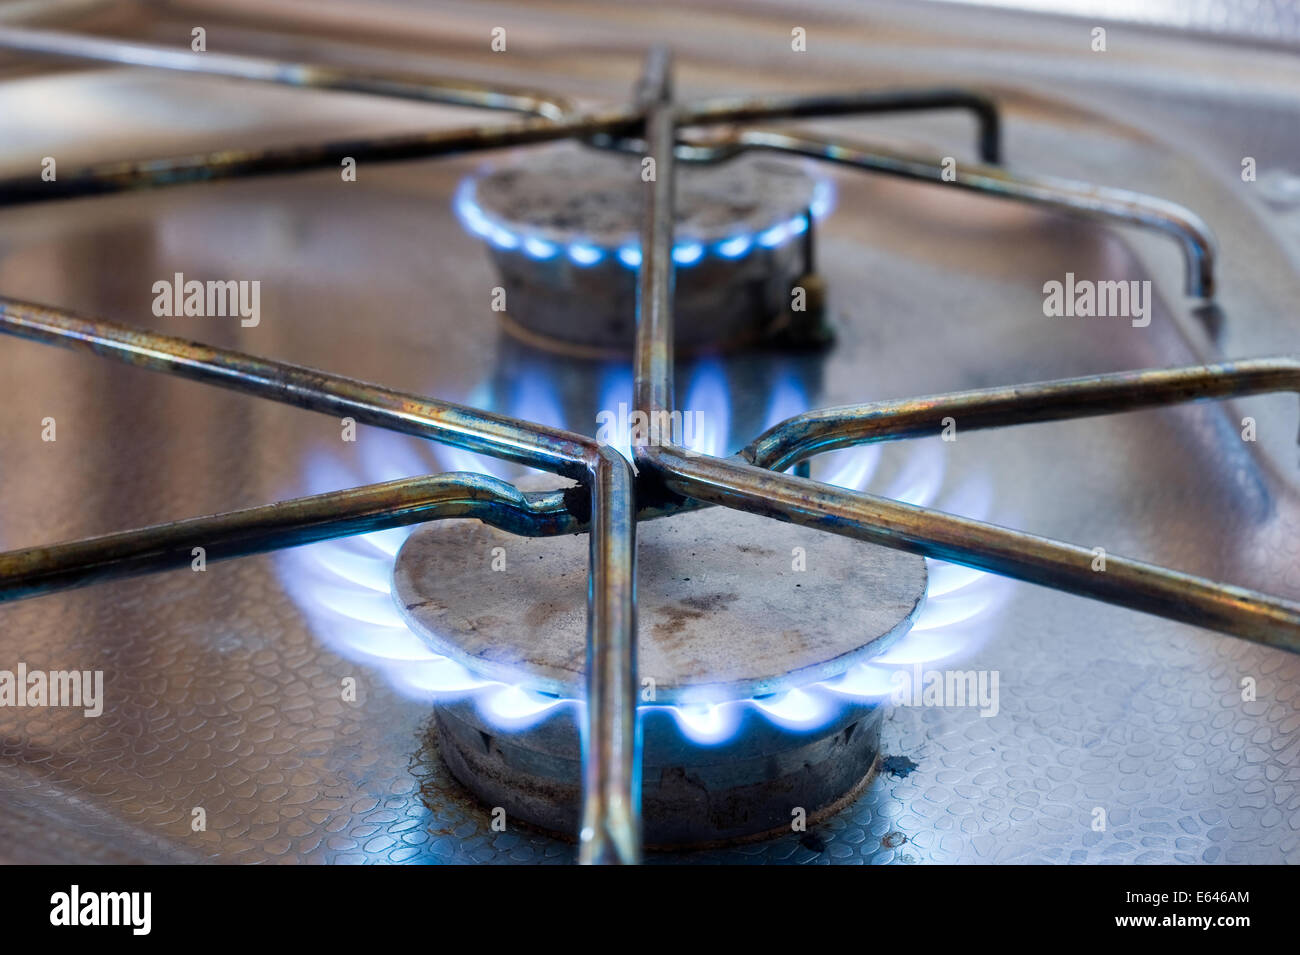 Two burners from a gas stove in a caravan Stock Photo